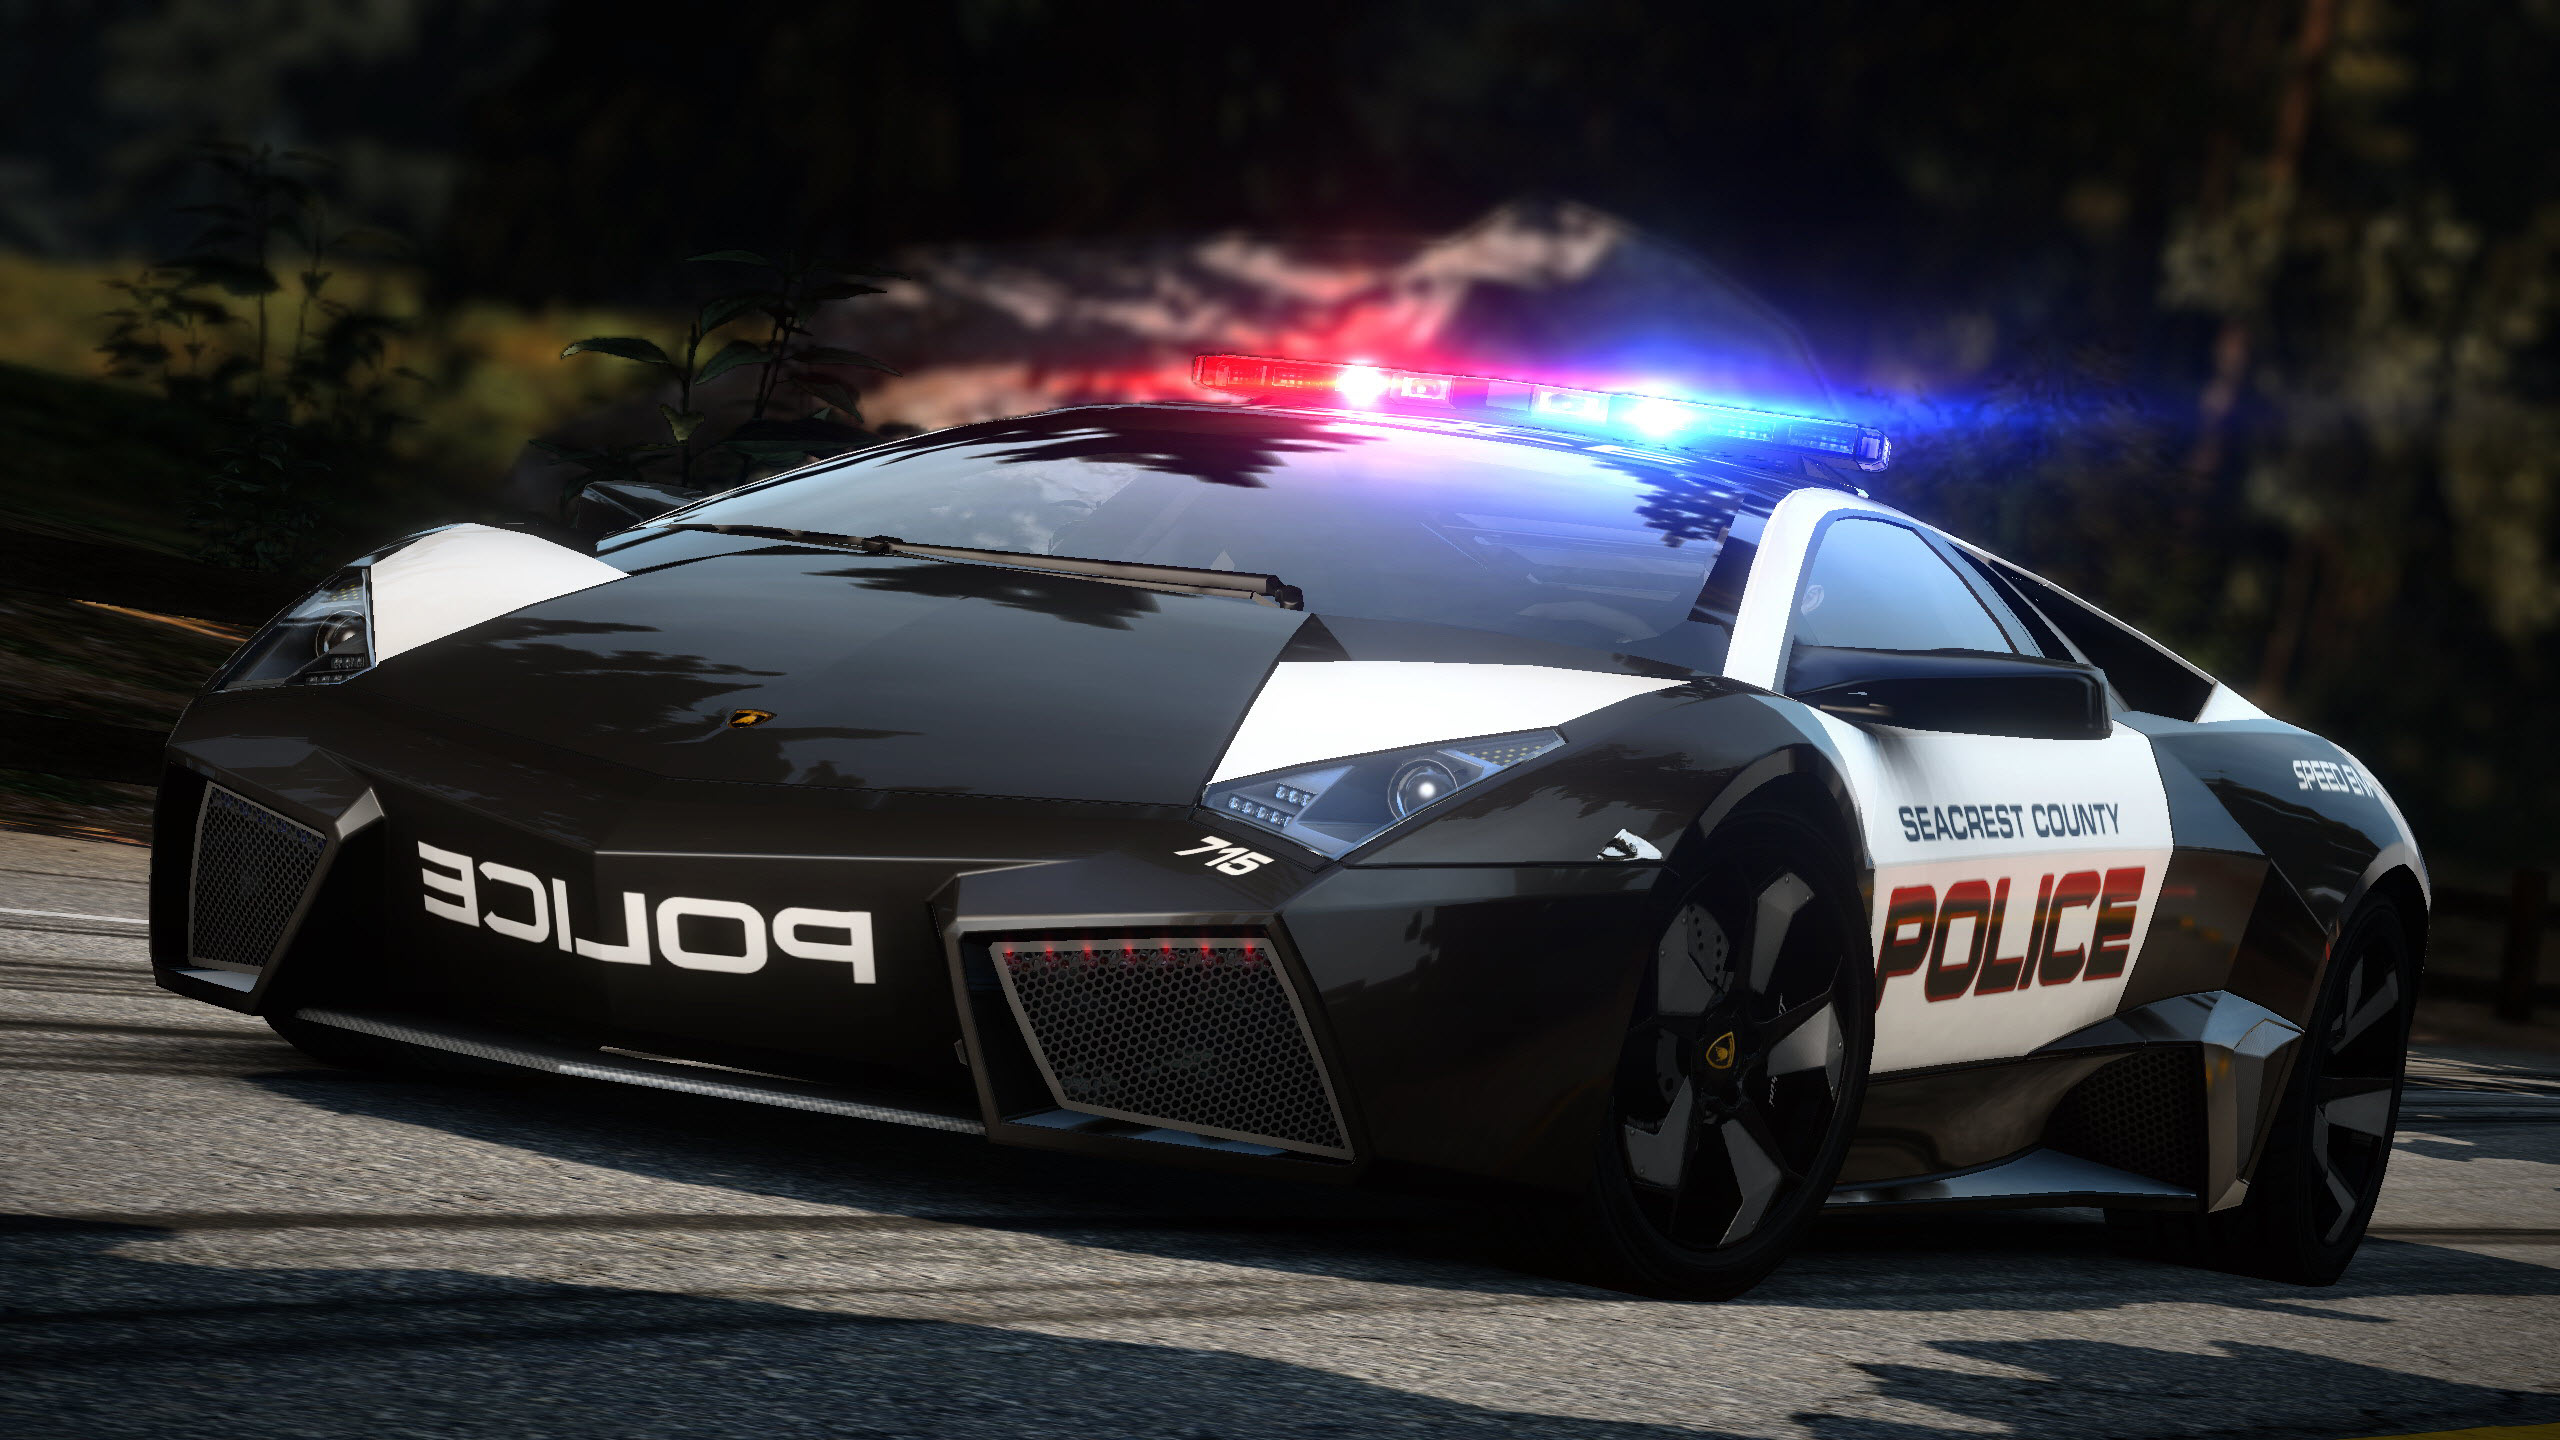 Car, Fast, Police, Smart Wallpaper,car Hd Wallpaper,fast - Need For Speed Hot Pursuit Police Car - HD Wallpaper 